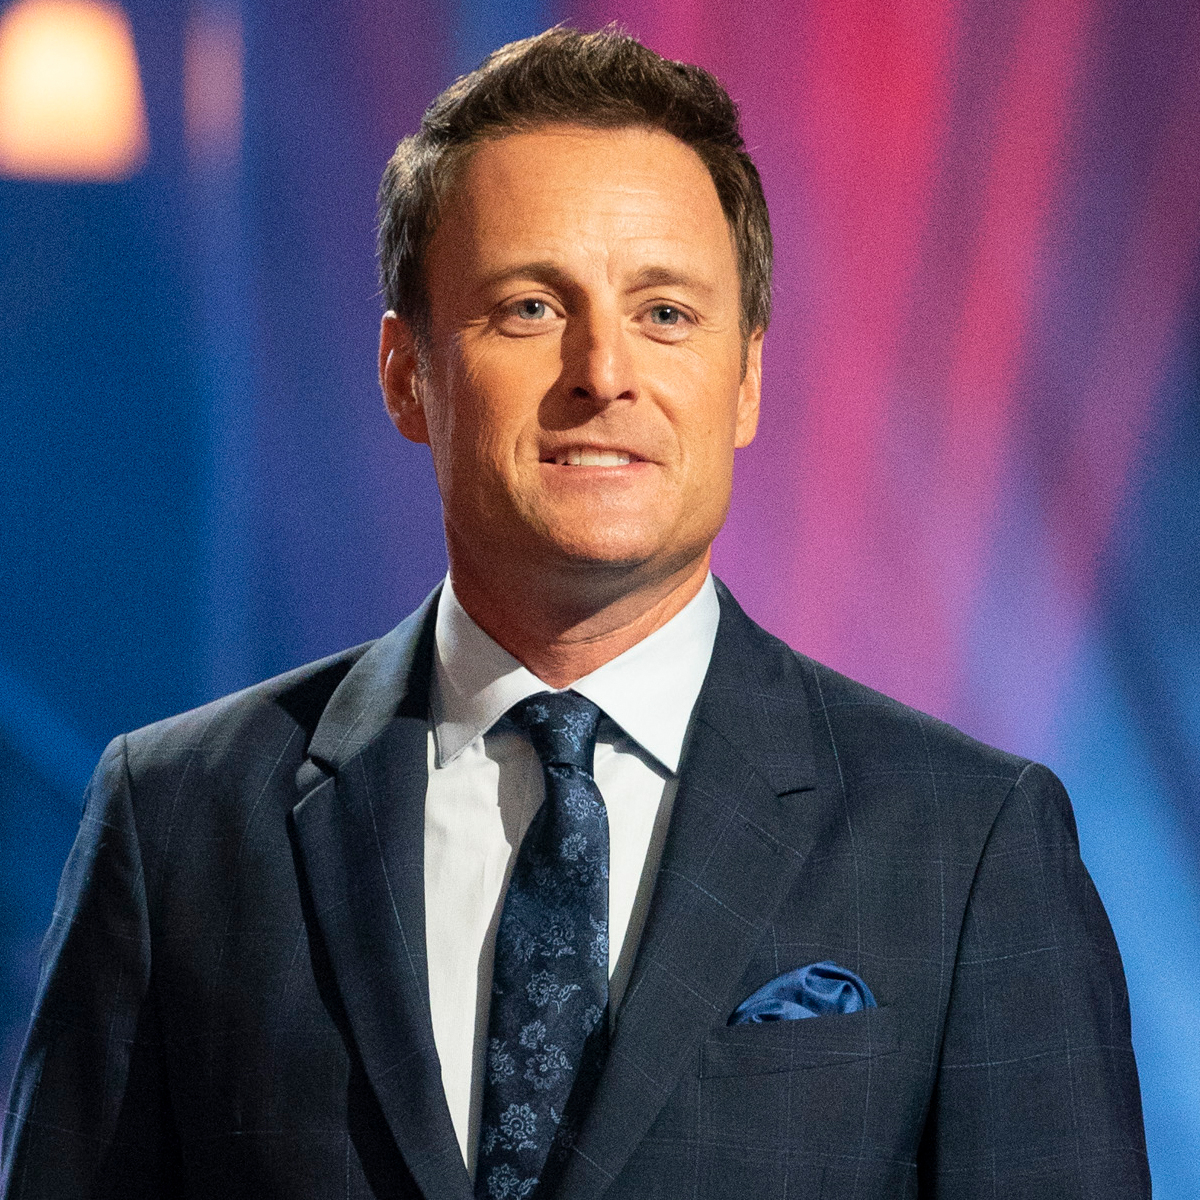 Chris Harrison Reveals If He'd Ever Return to The Bachelor